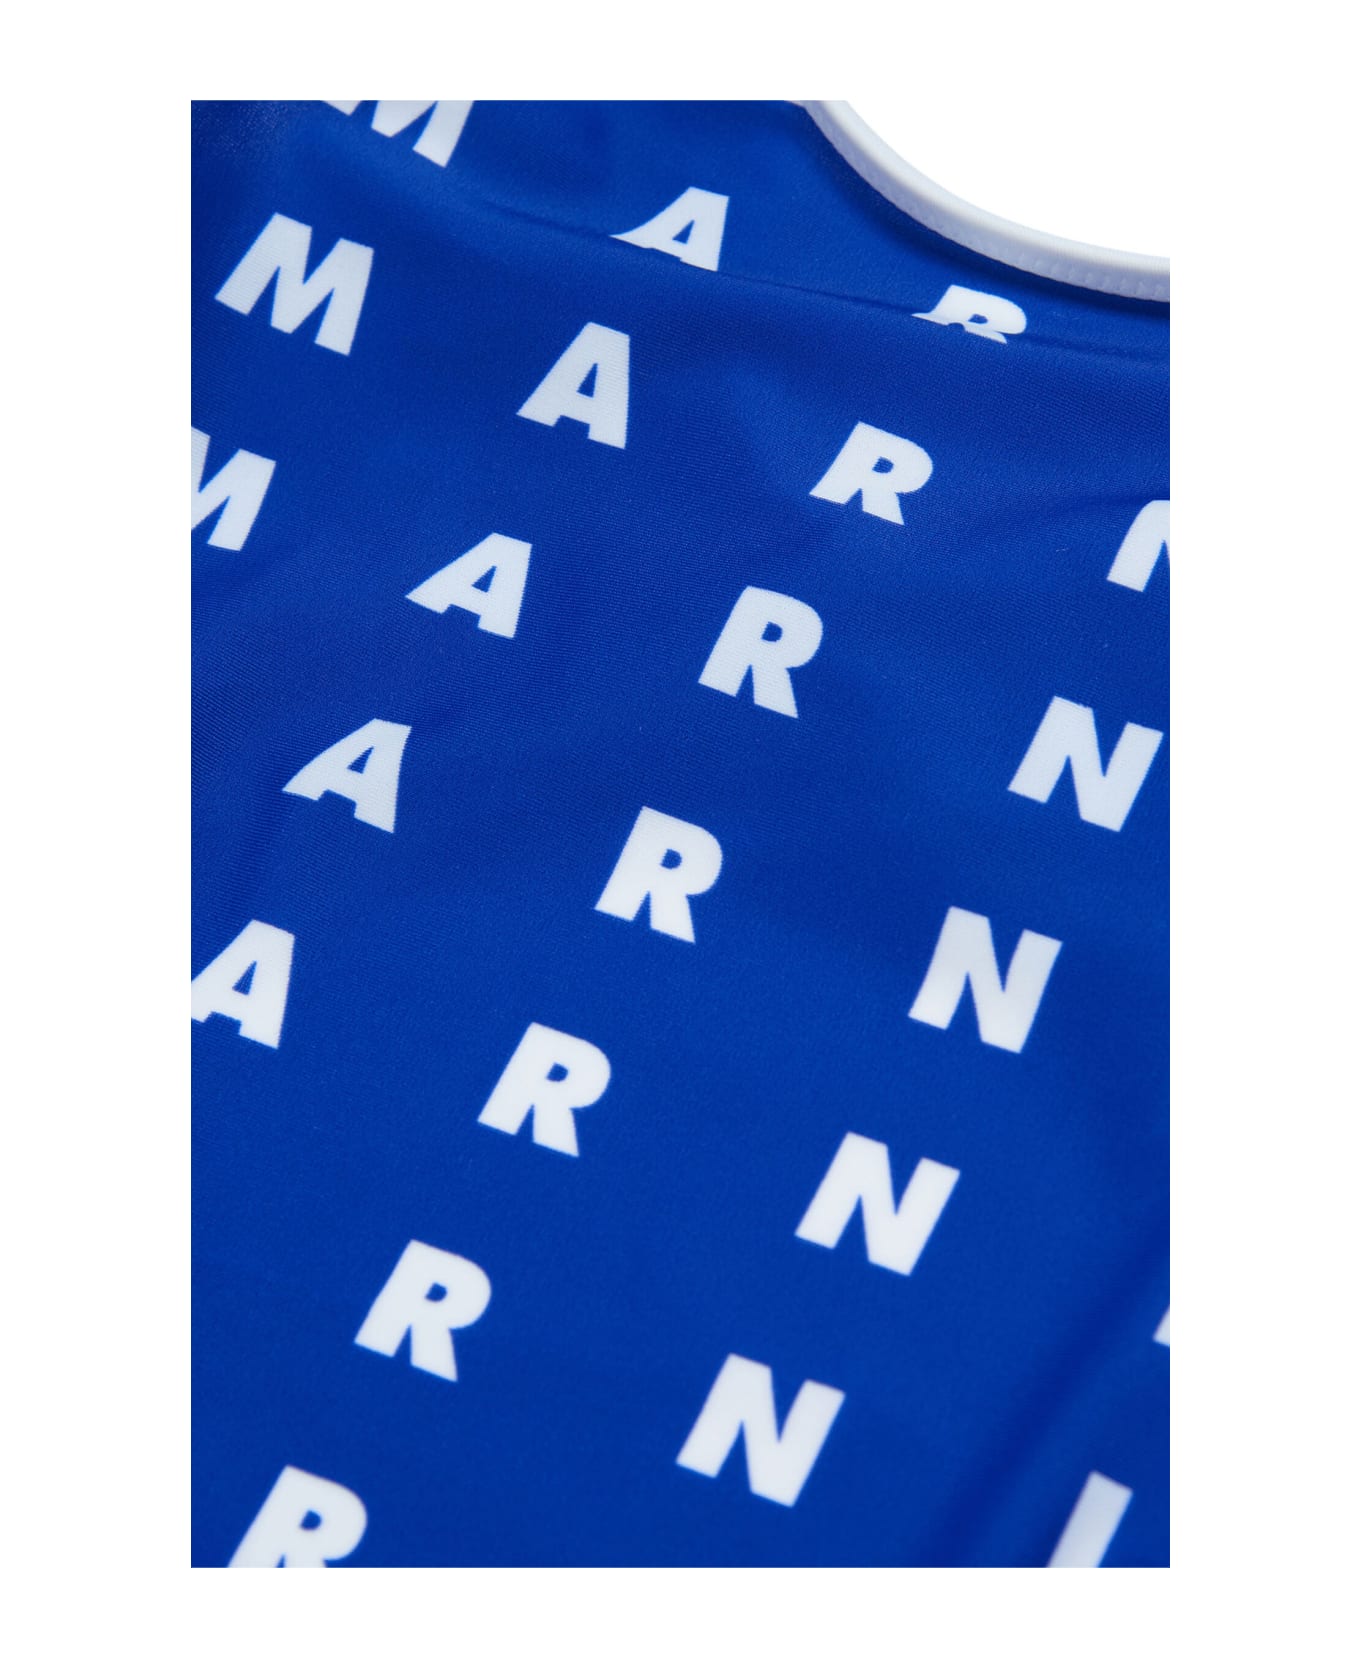 Marni Mm10f Swimsuit Marni Blue One-piece Swimming Costume In Lycra With Allover Logo - MARNI JACKET WITH BLAZER MOTIF